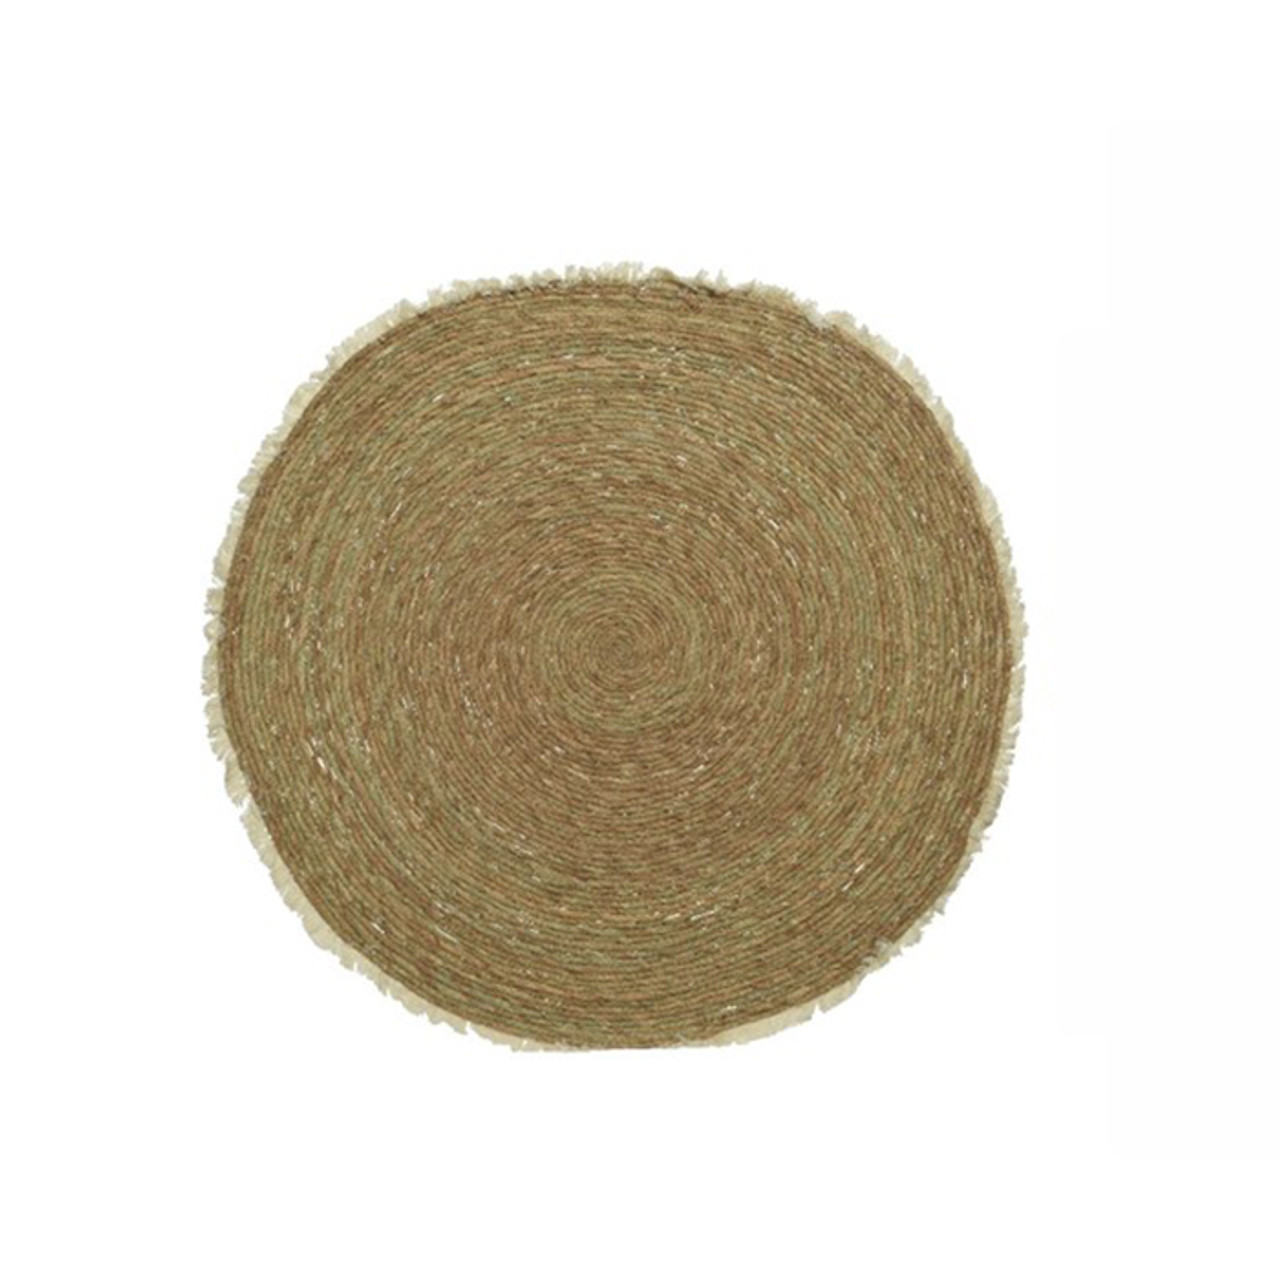 Cornleaf Outdoor Rug 100cm (Qty:1 item) (Available in 2 Colours)